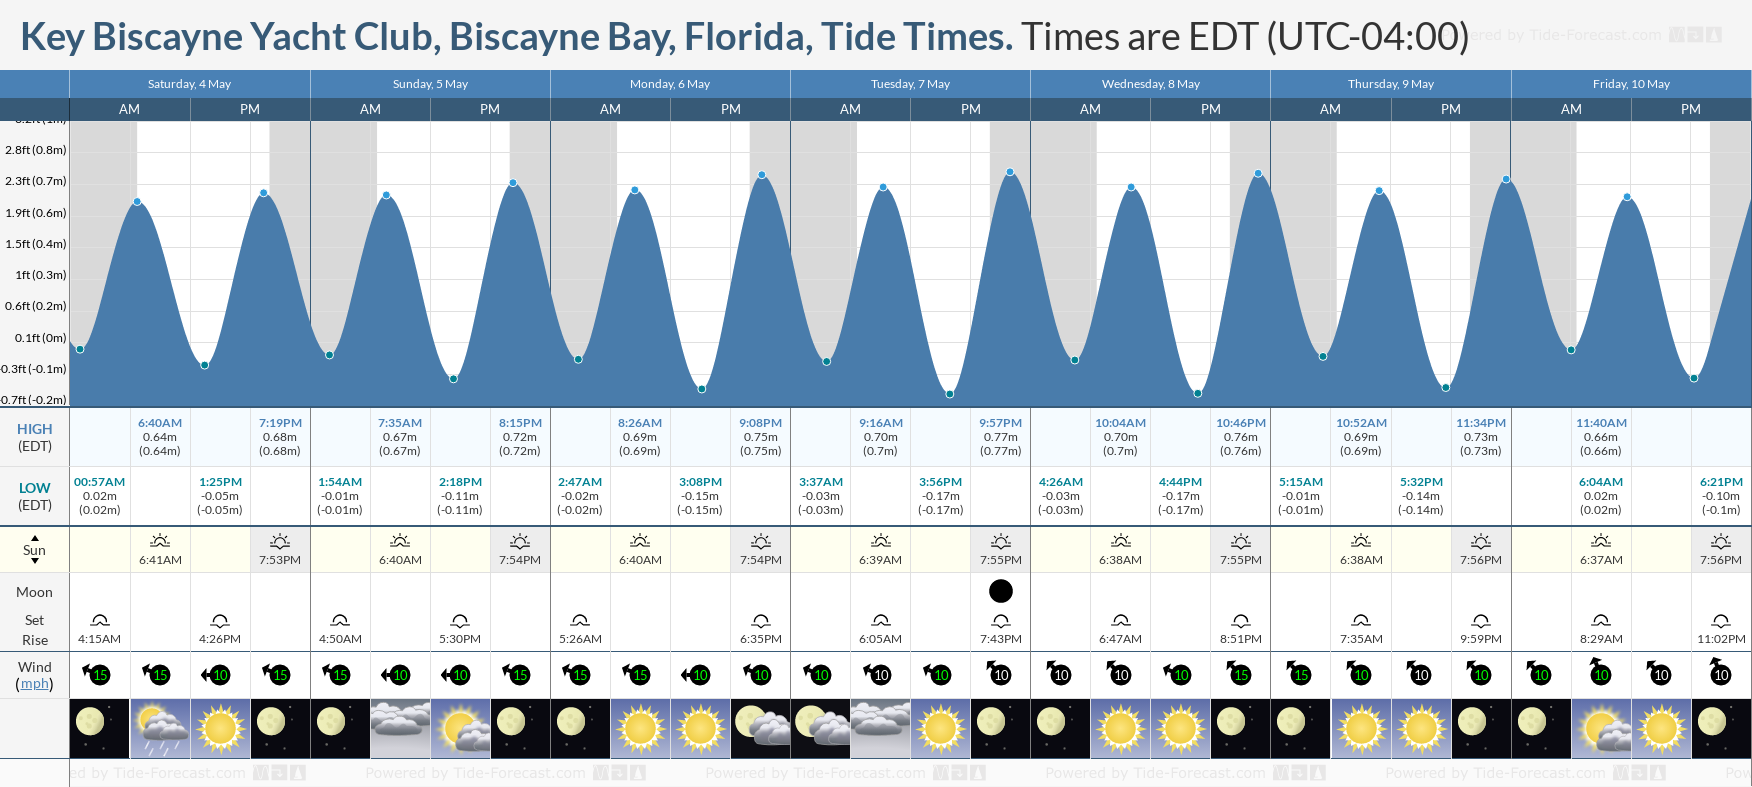 Key Biscayne Yacht Club, Biscayne Bay, Florida Tide Chart including high and low tide times for the next 7 days